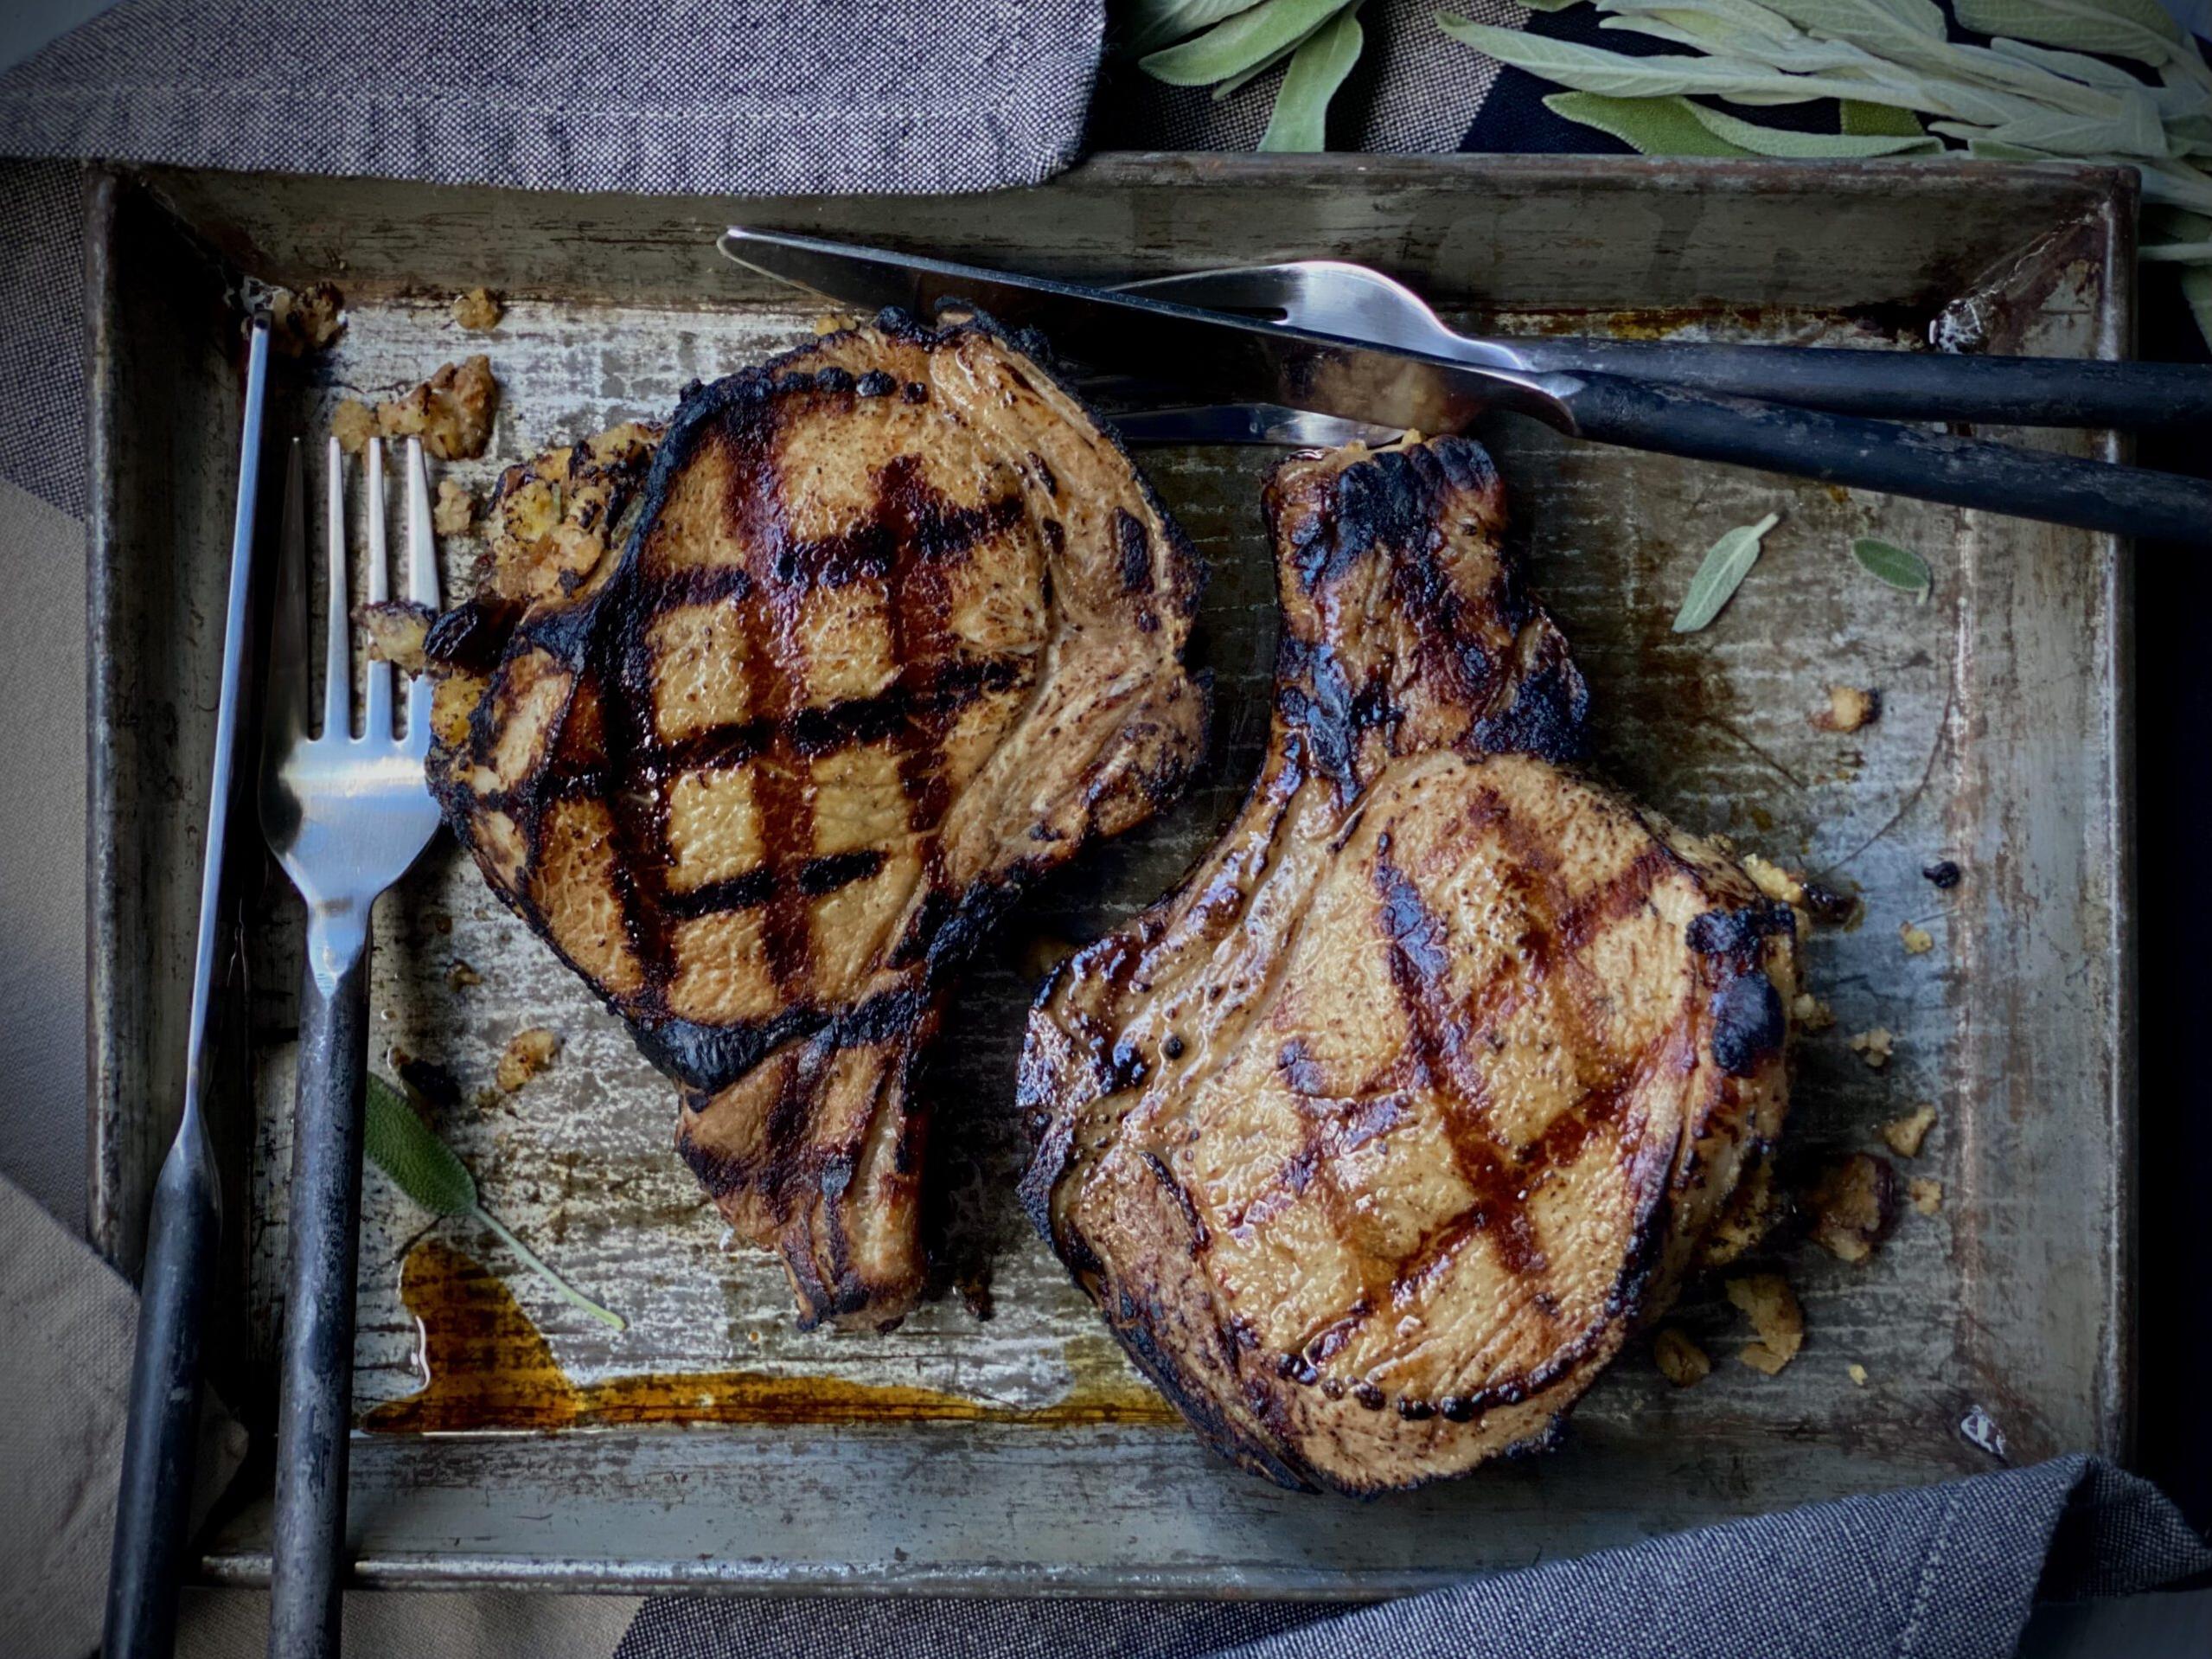  Don't settle for boring pork chops, add character to your meal with our recipe.